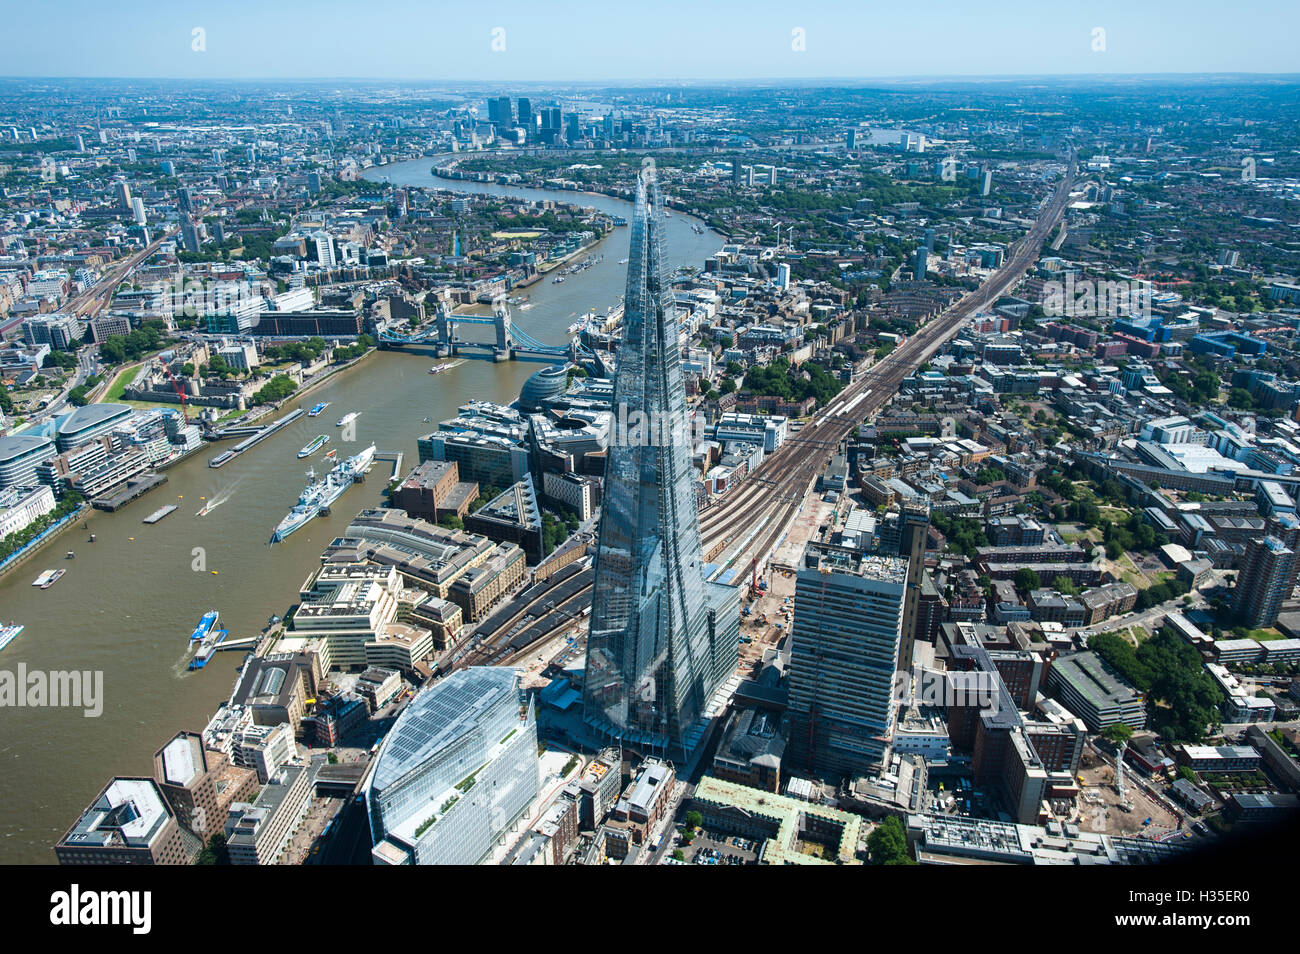 An aerial view of The Shard, standing at 309.6 metres high, the tallest buliding in Europe, London, England, UK Stock Photo